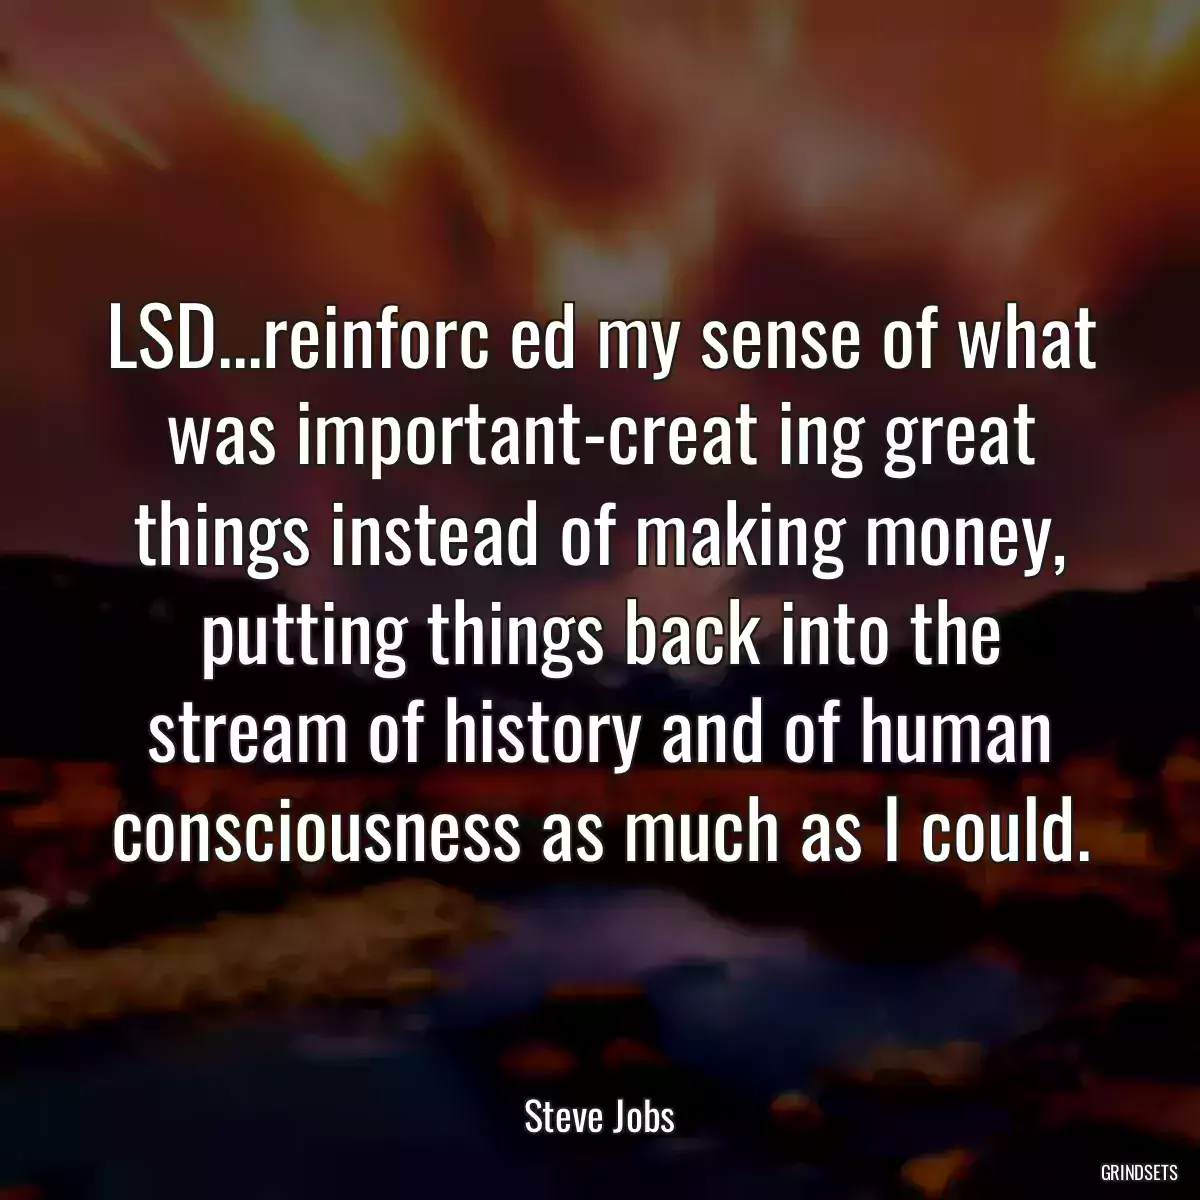 LSD...reinforc ed my sense of what was important-creat ing great things instead of making money, putting things back into the stream of history and of human consciousness as much as I could.